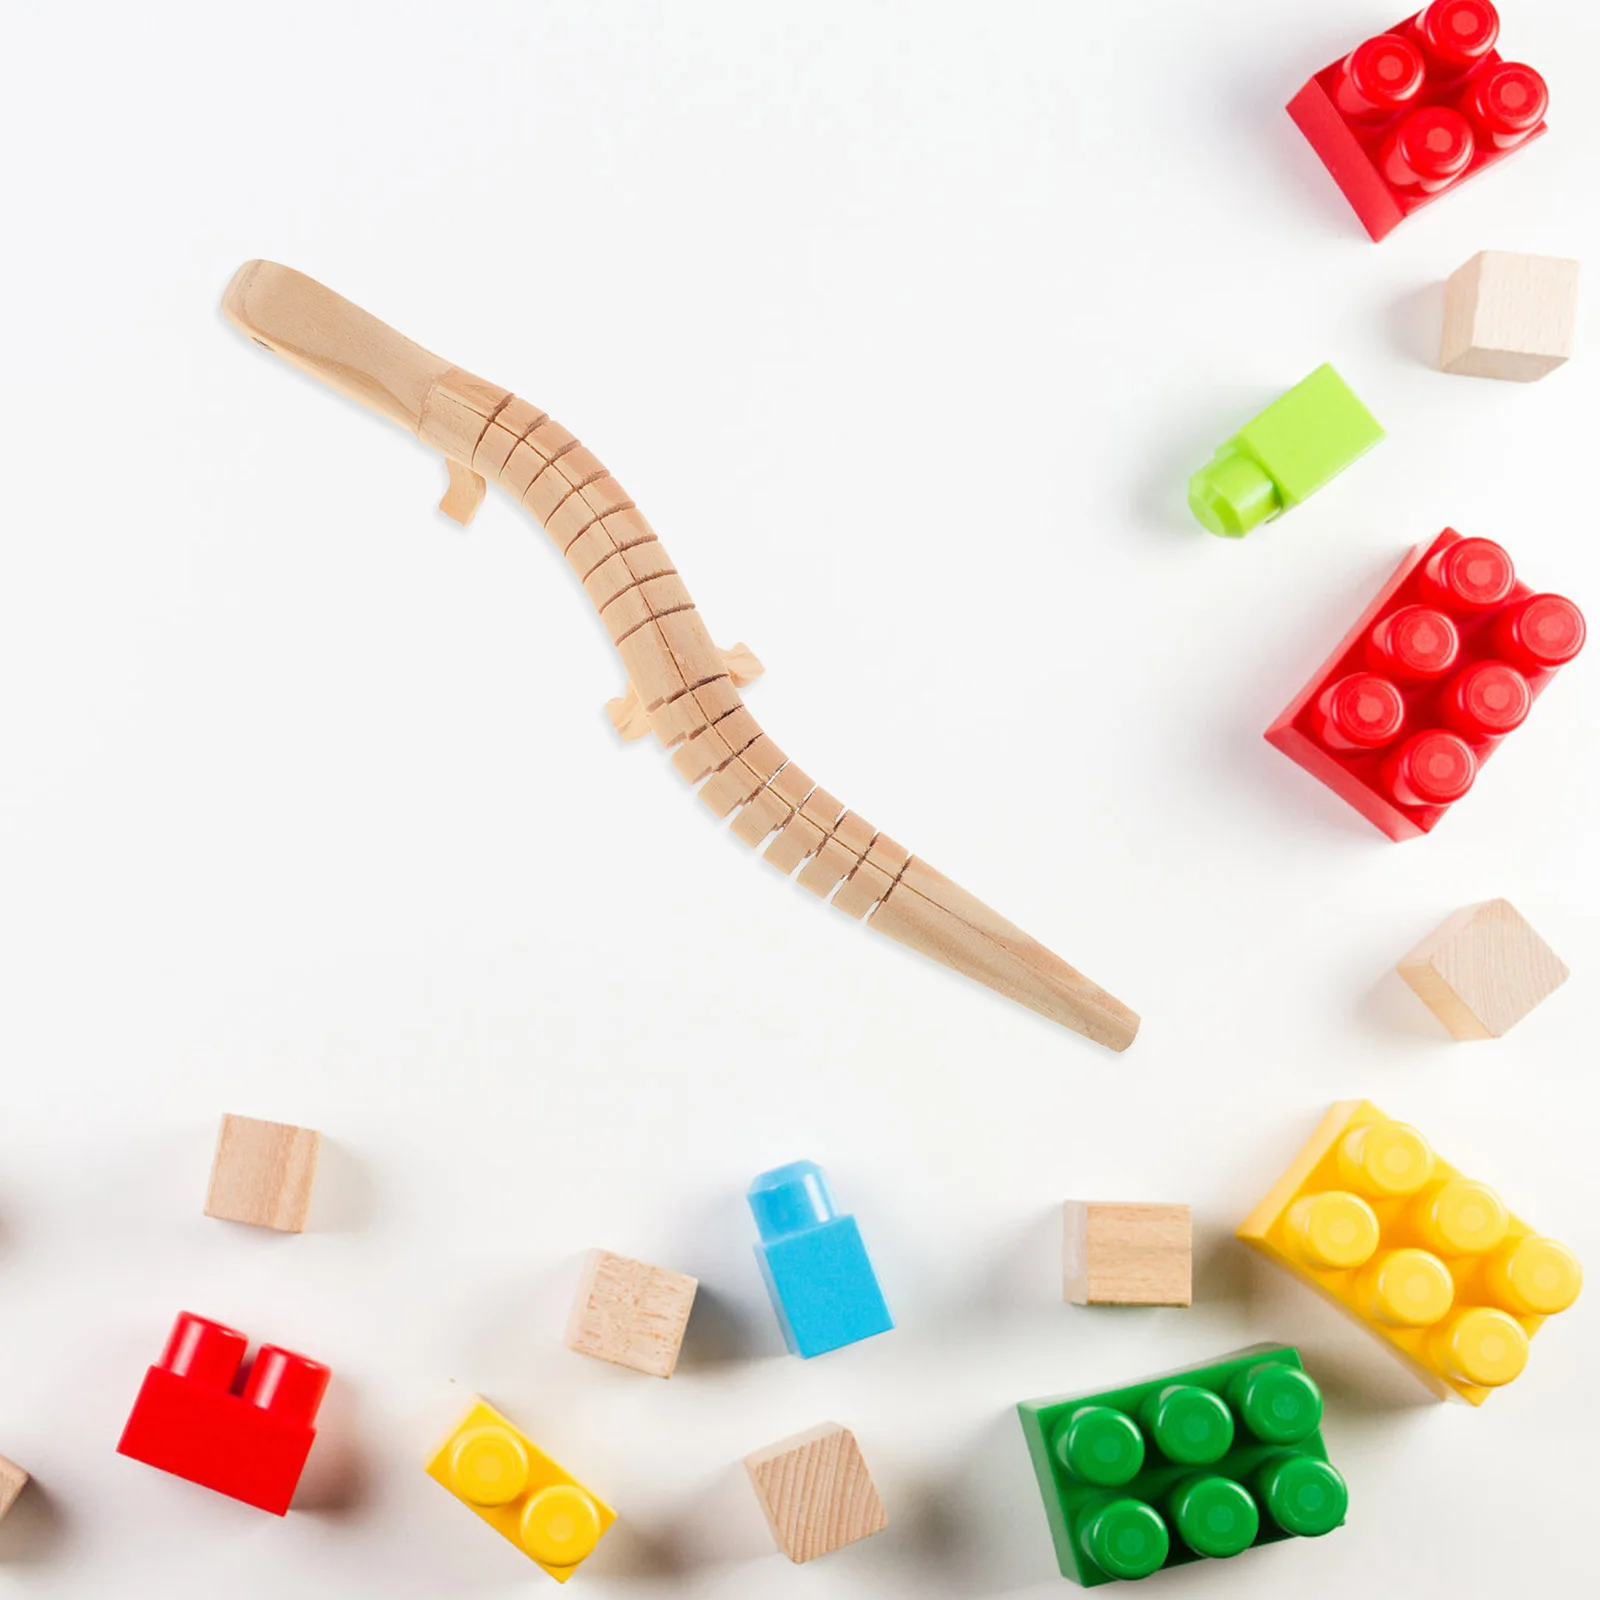 

5 Pcs Wooden Lizard Toy Animal Blank DIY Unfinished Model Kids Toys Wiggle It Can Move Vivid Sensory Realistic